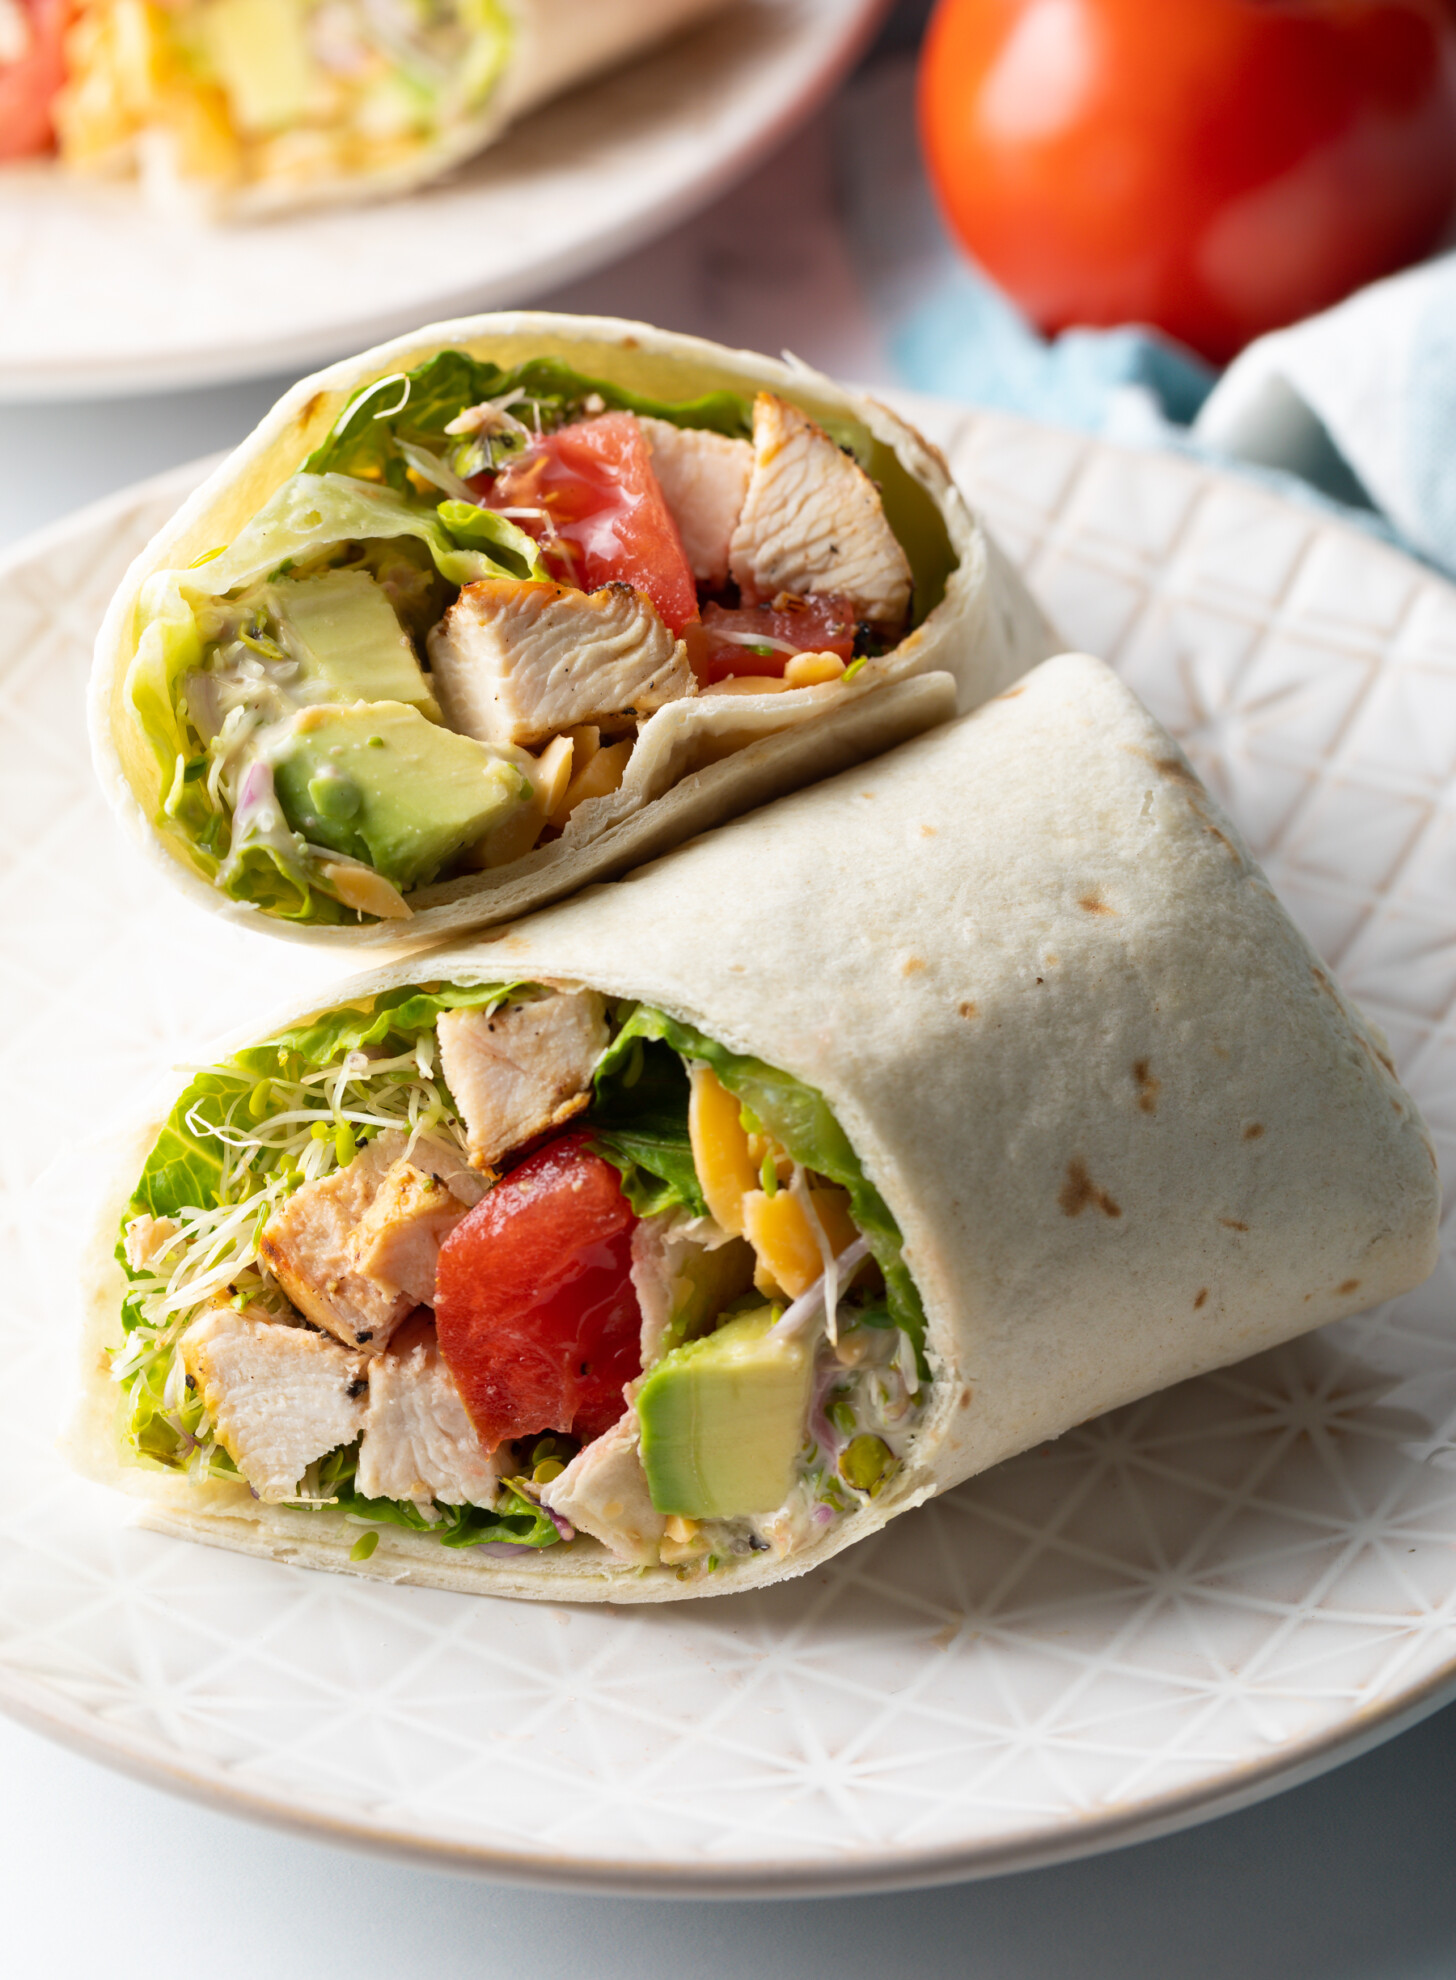 Ultimate Chicken Wrap Recipe - A Spicy Perspective